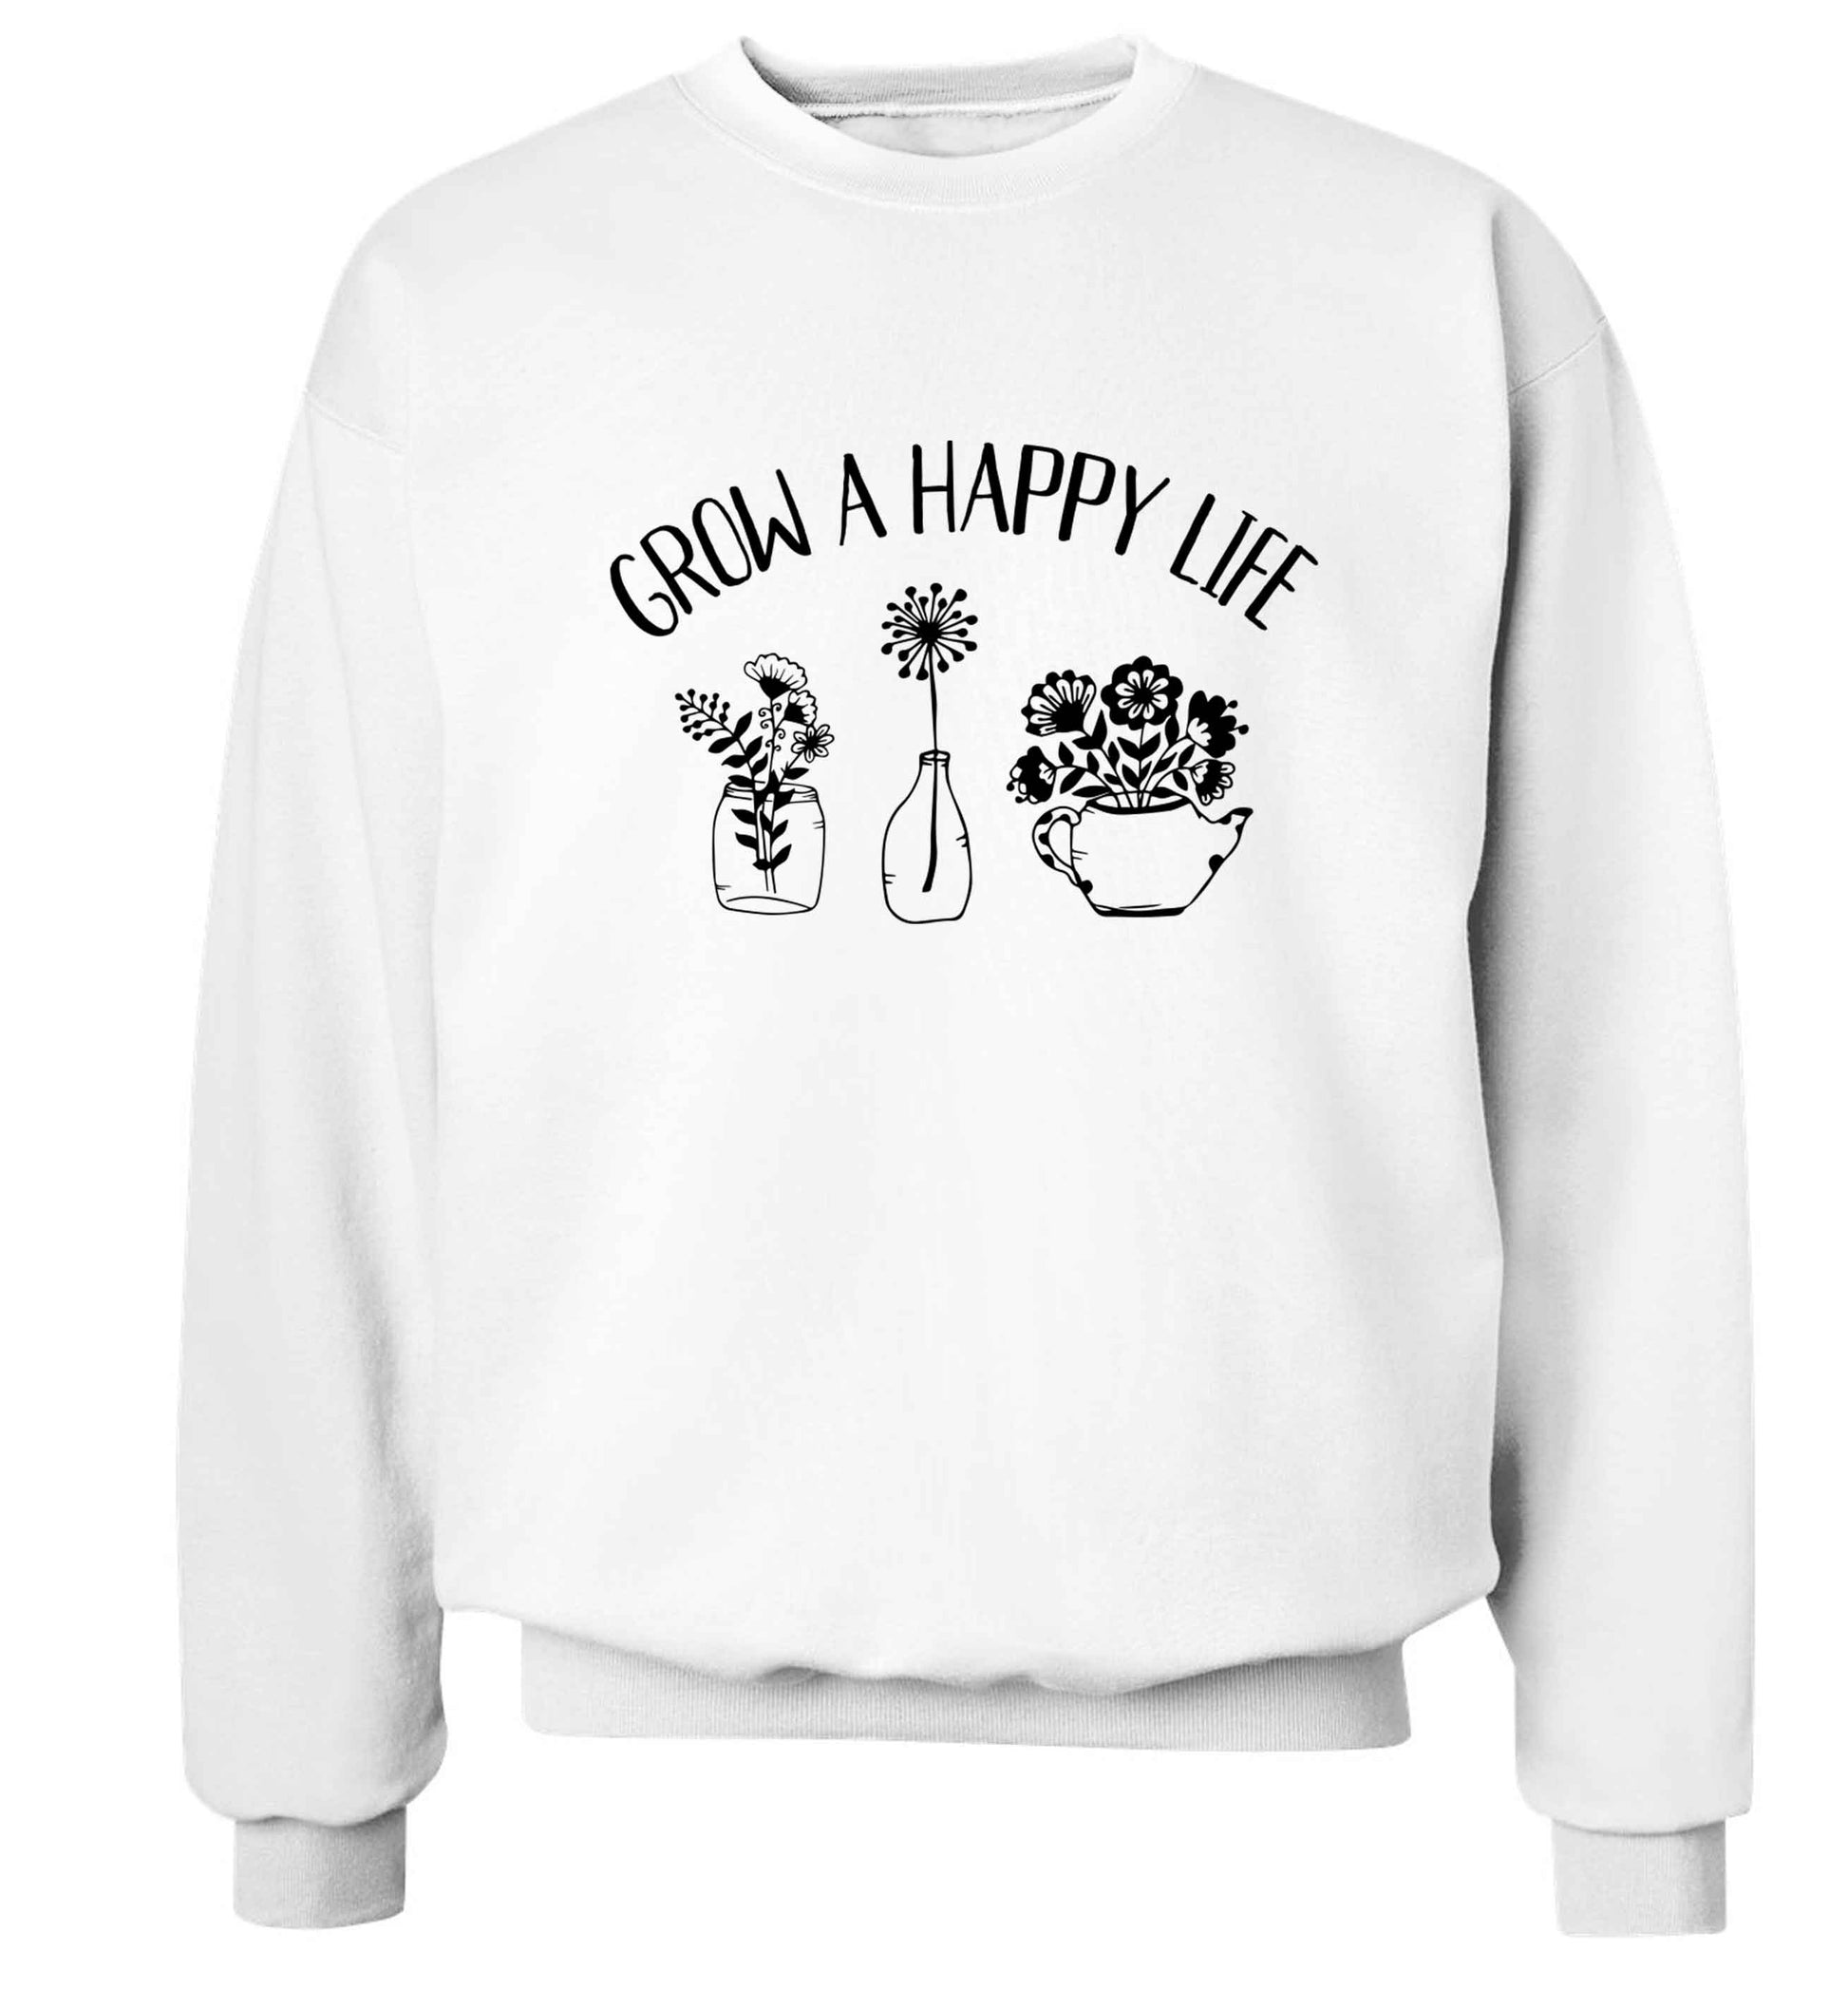 Grow a happy life Adult's unisex white Sweater 2XL